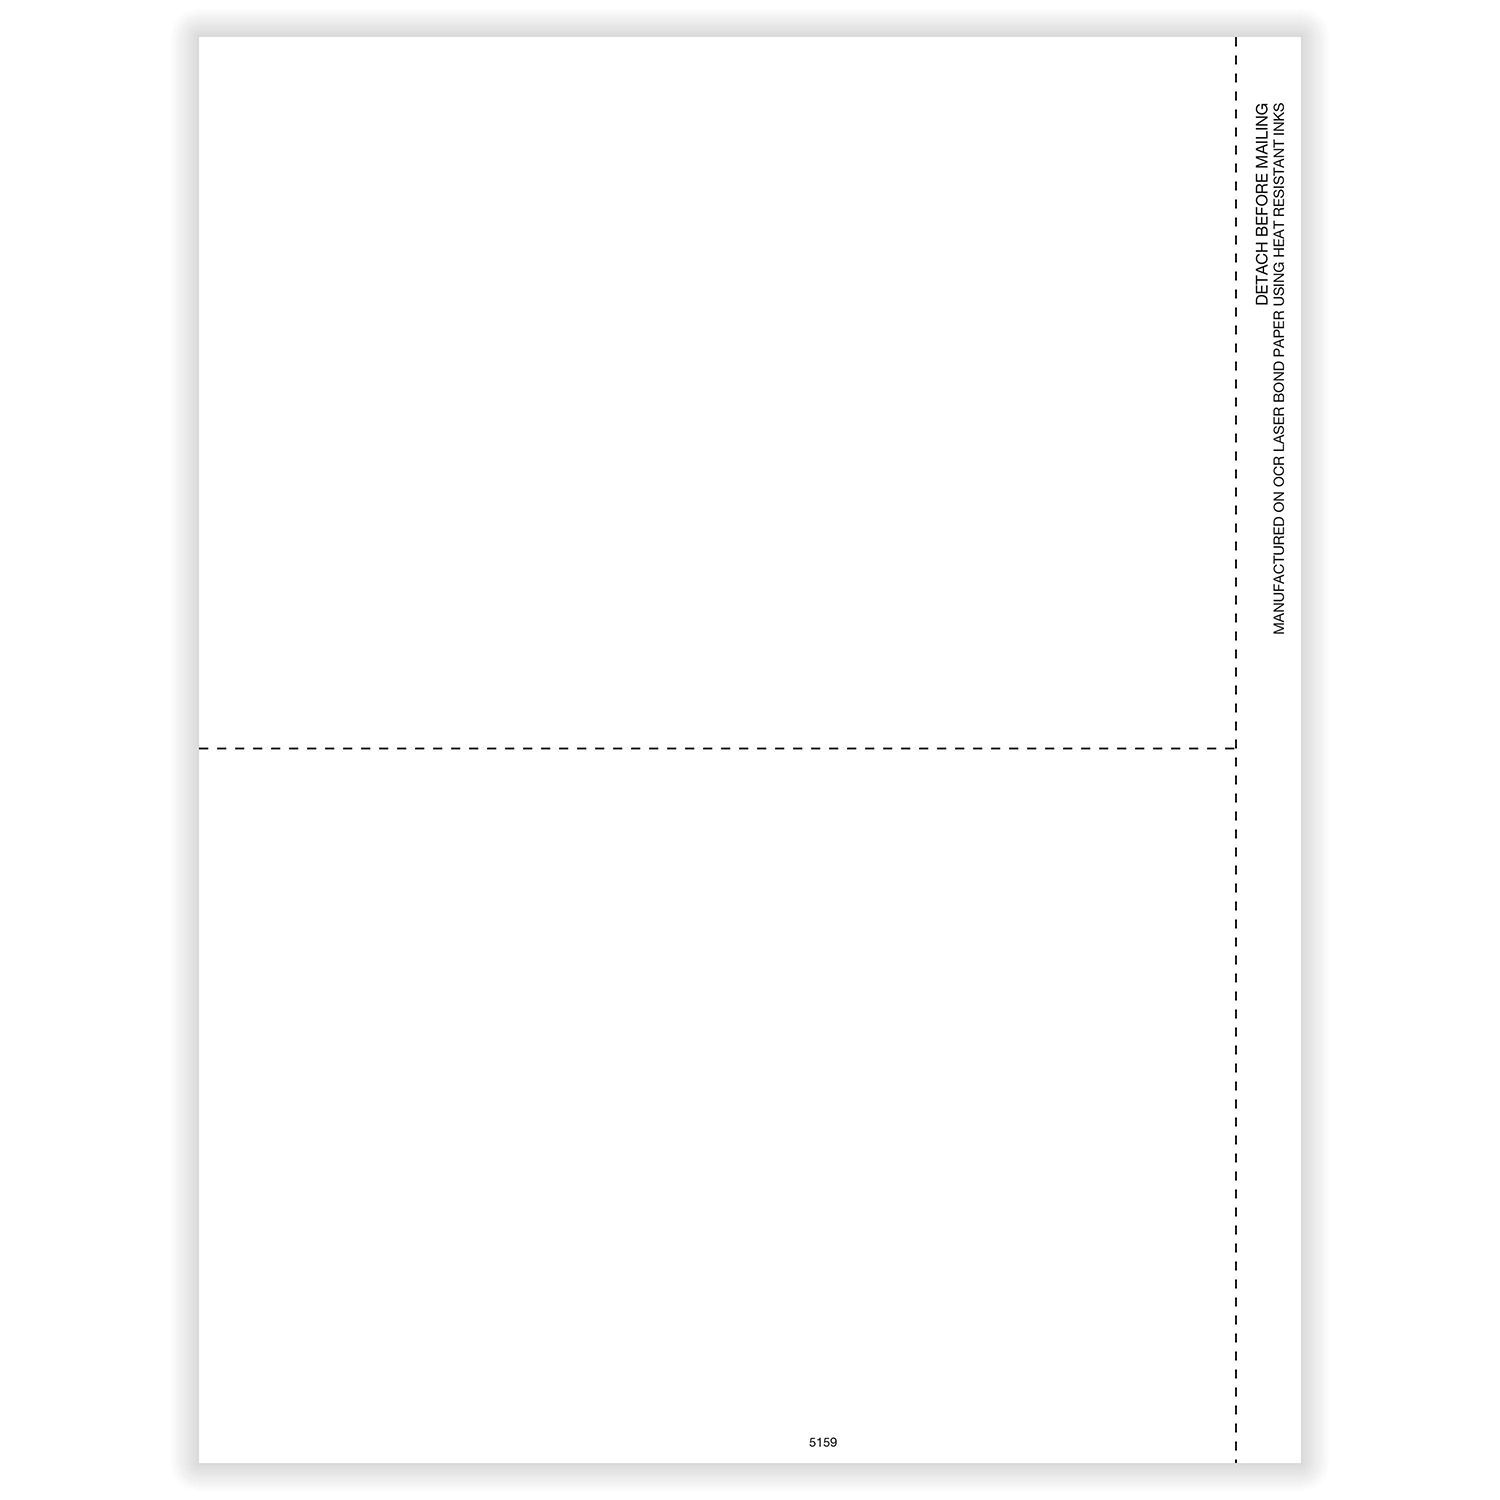 Picture of 1099-MISC Blank, Copy B, 2-Up, Stub, w/ Backer